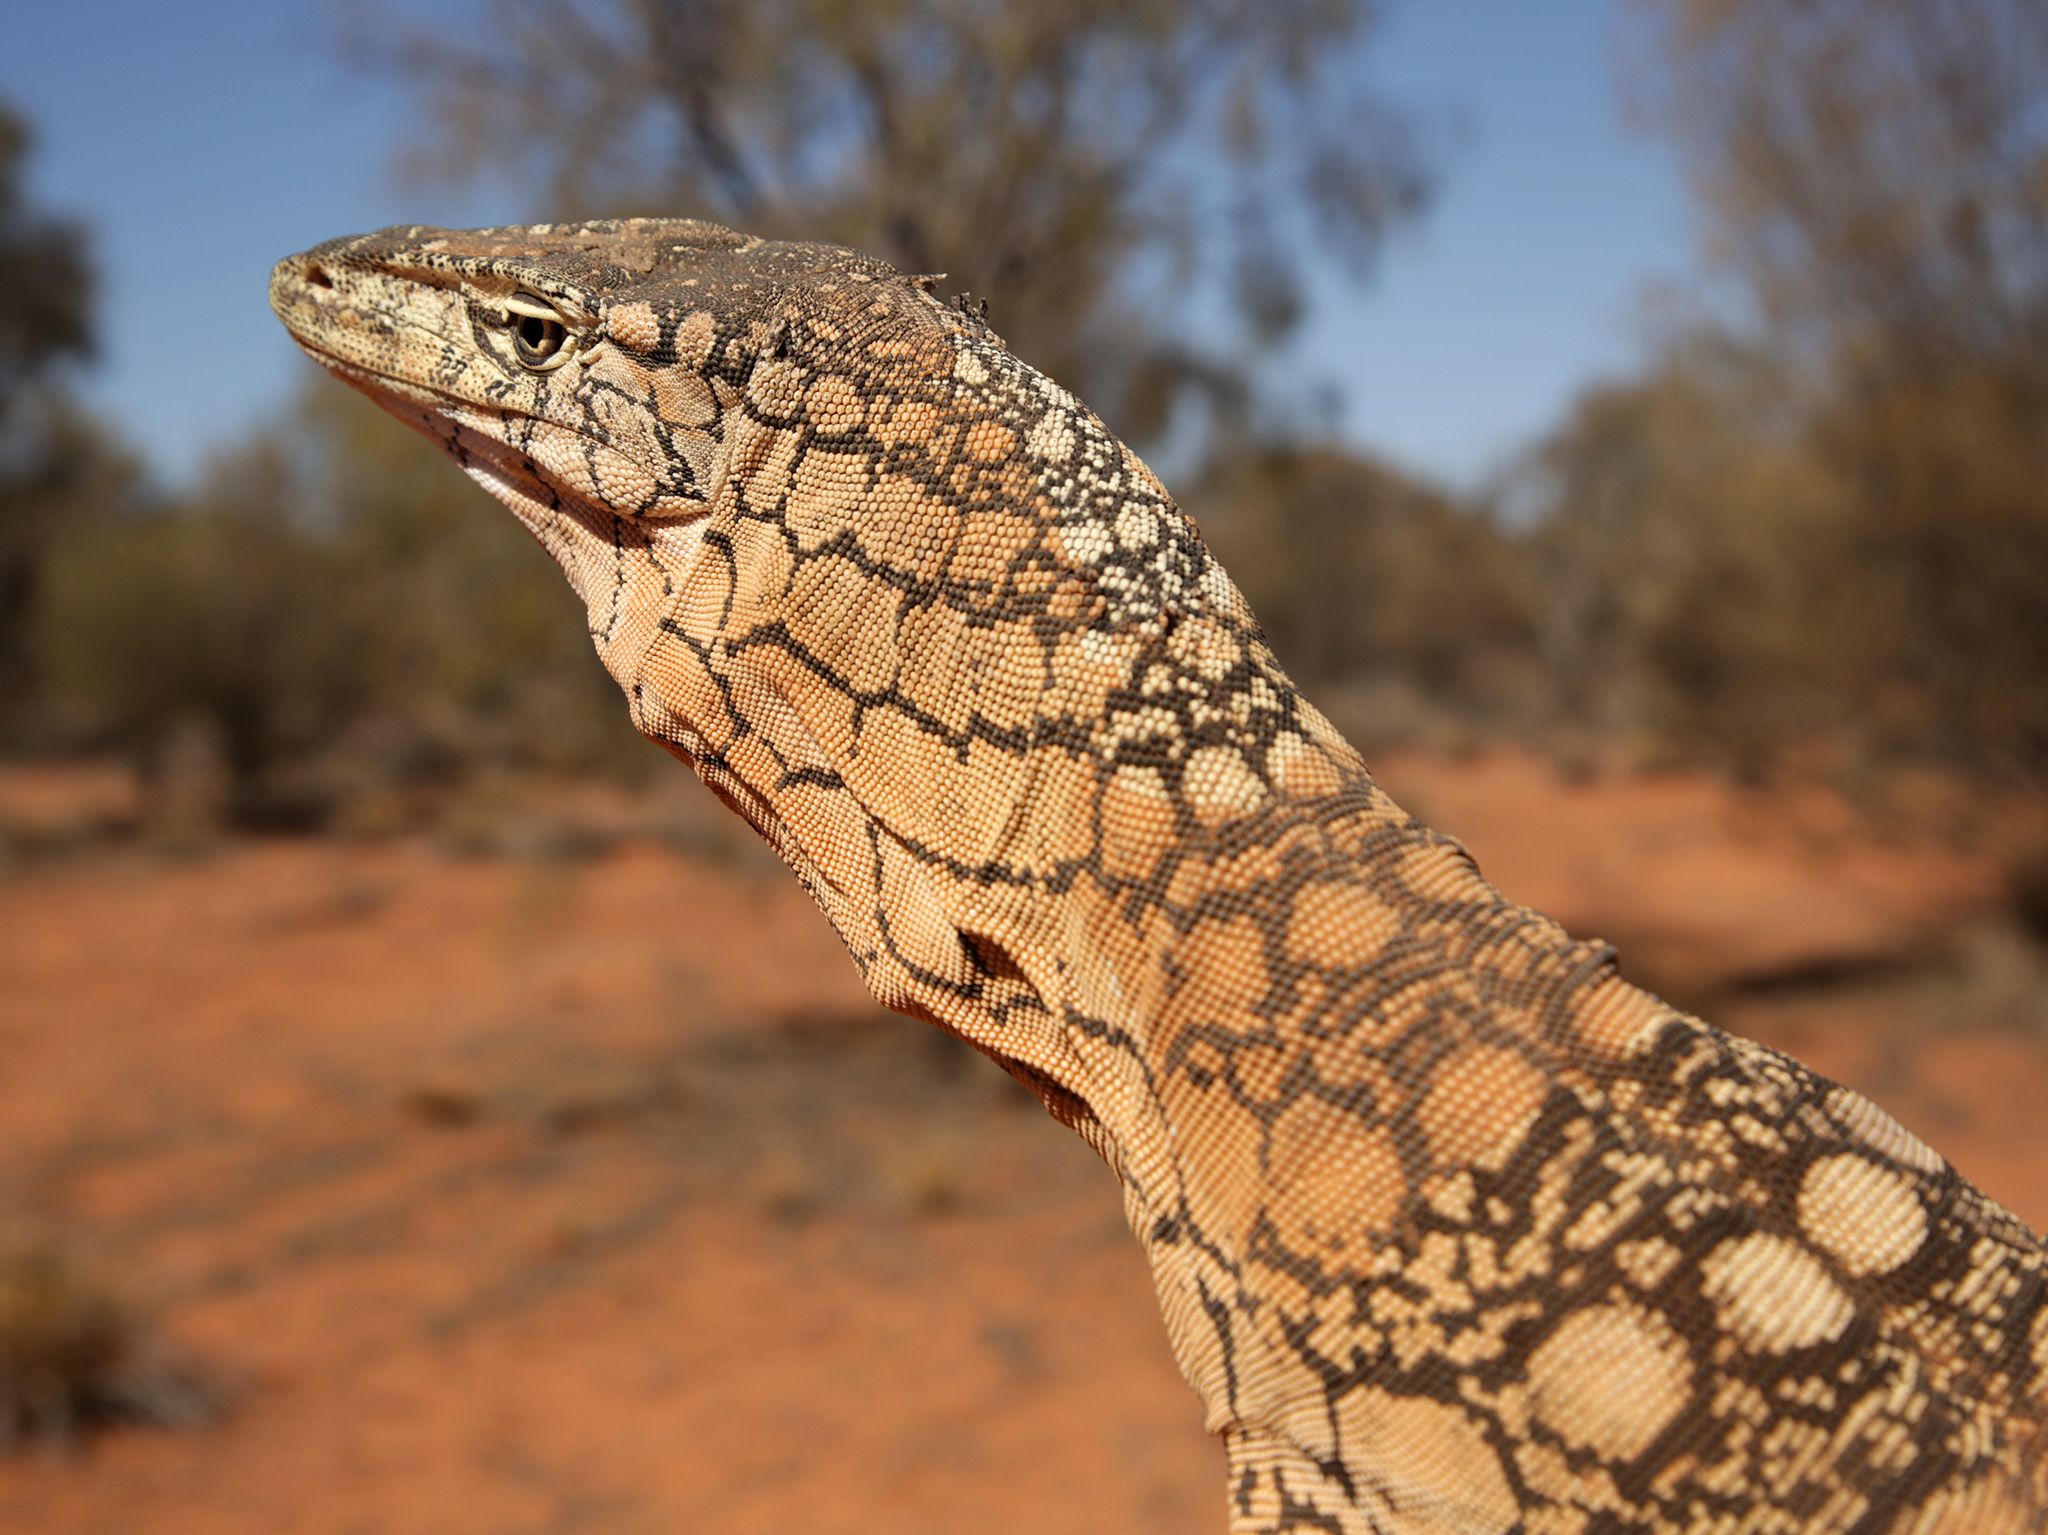 Australia's largest lizard, the perentie goanna, stands poised in the red desert sand in... [Photo of the day - September 2020]